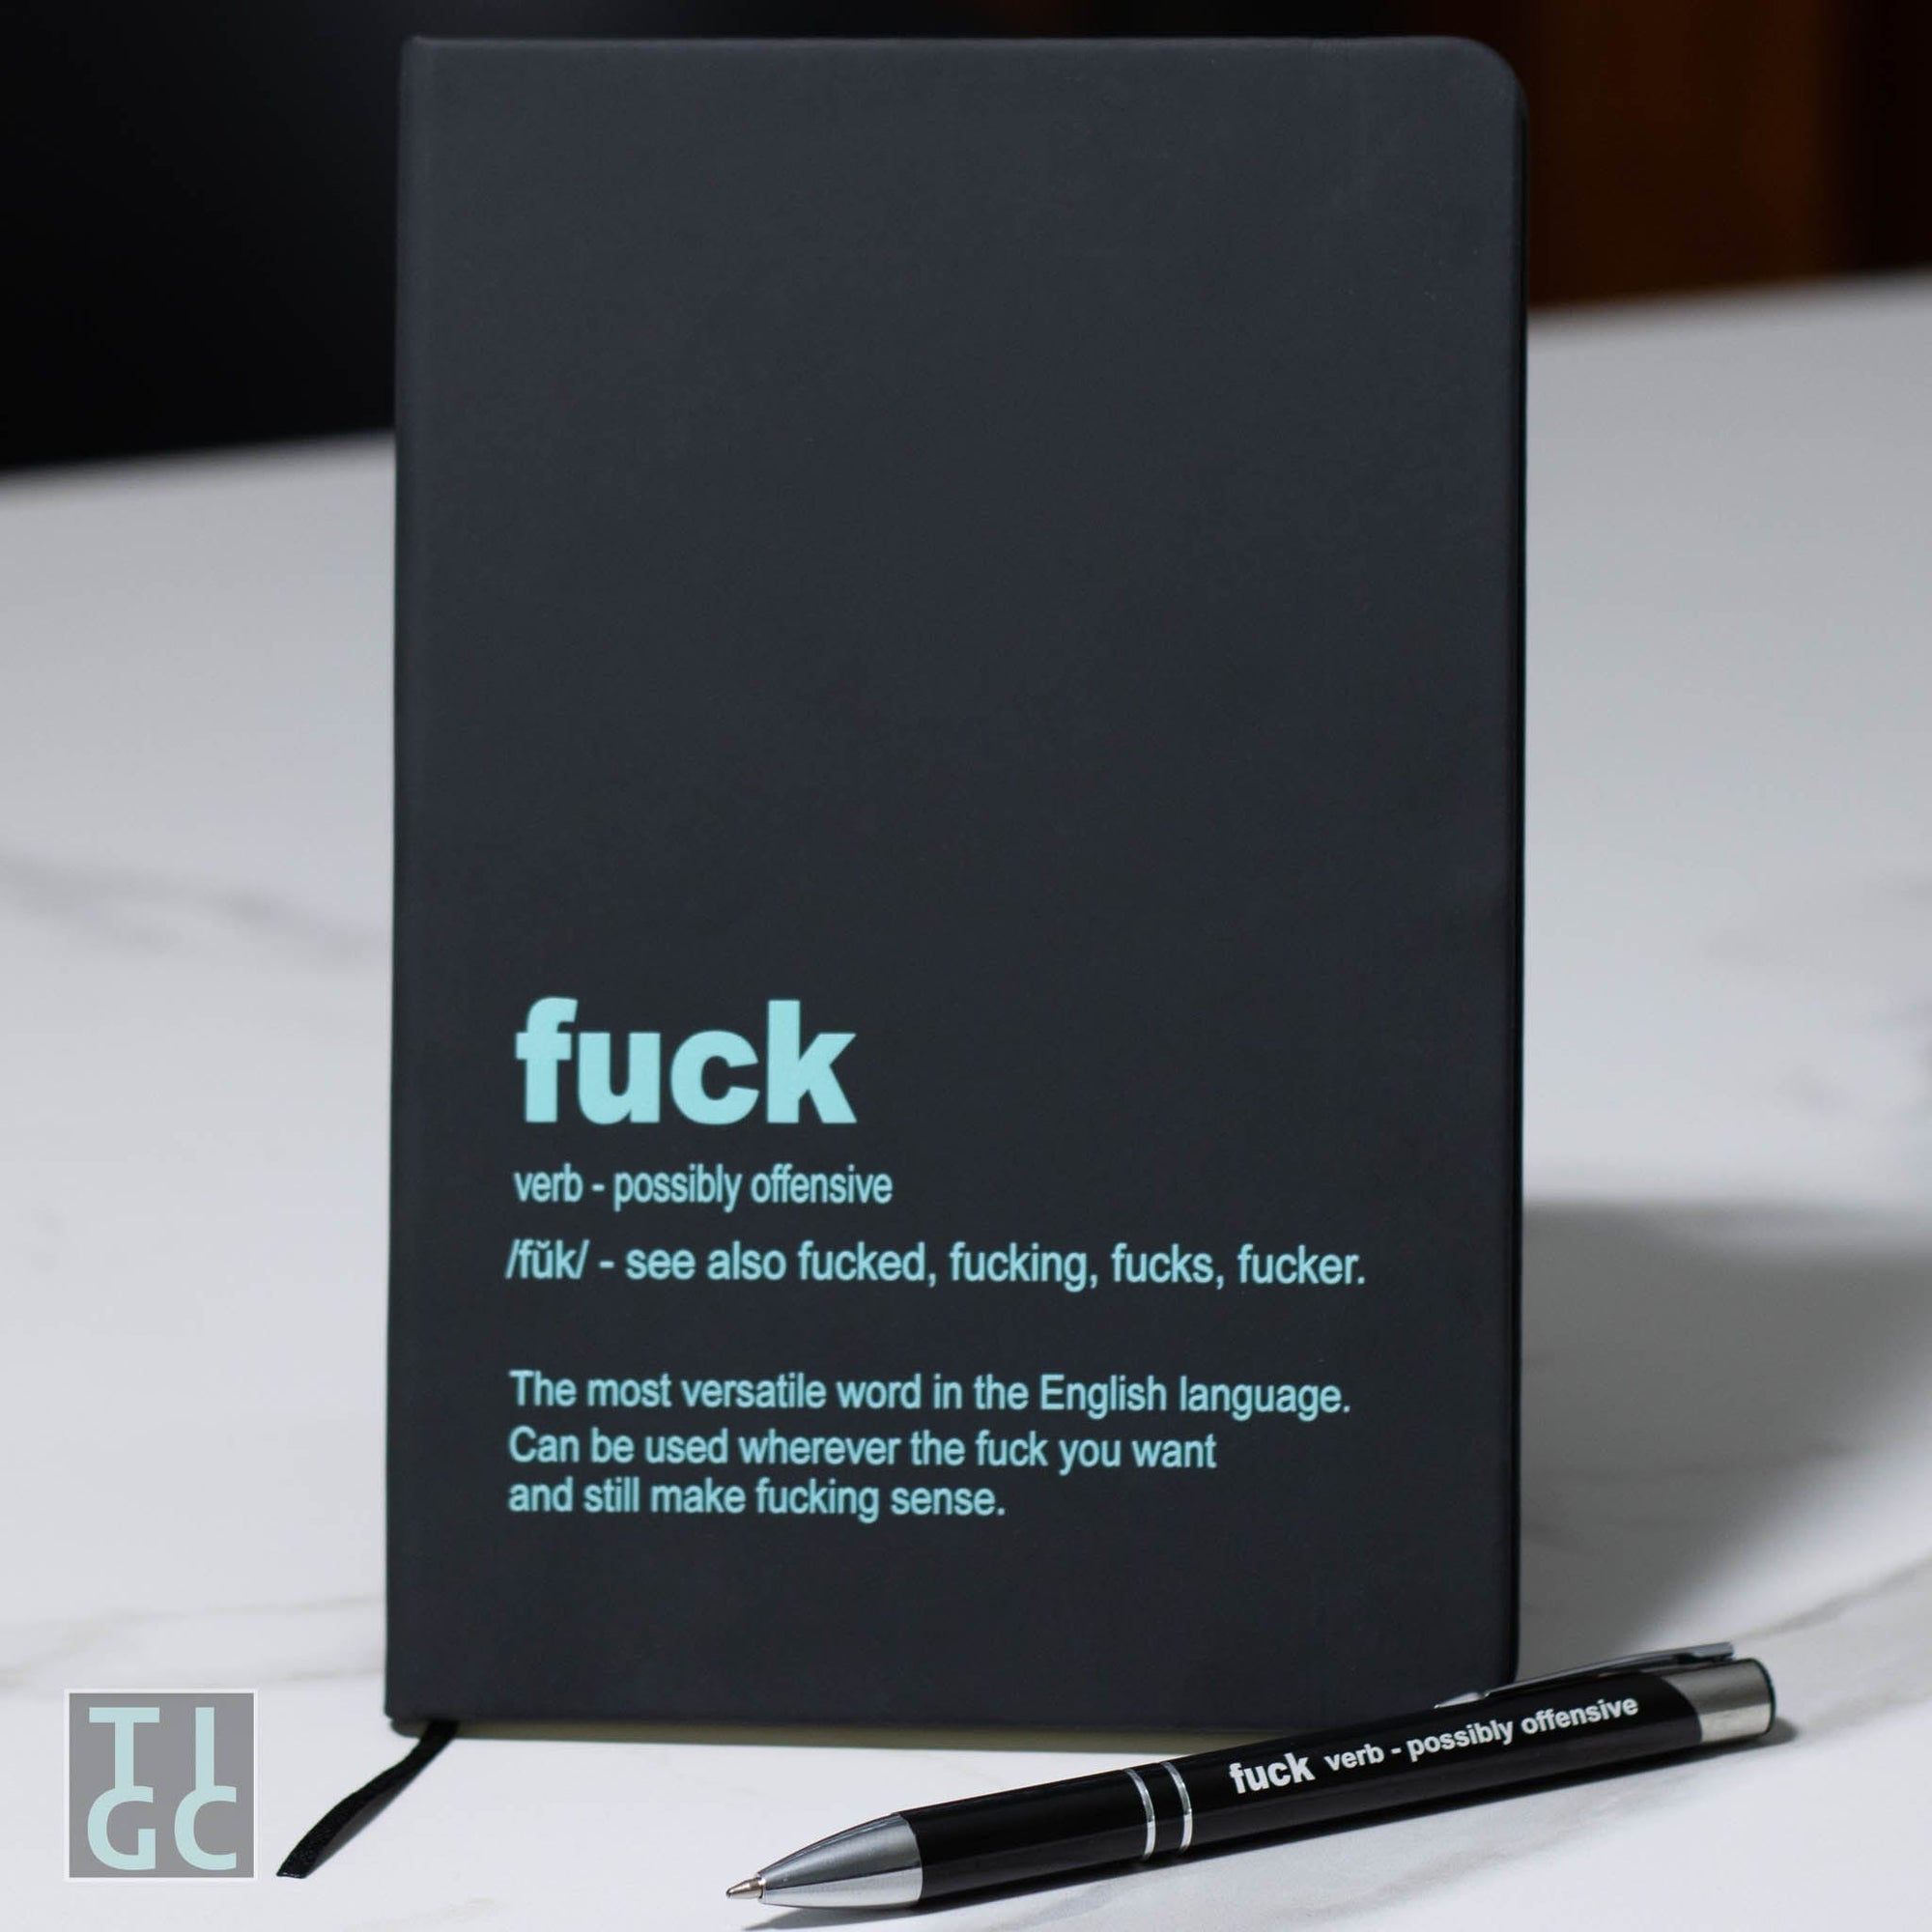 https://cdn.shopify.com/s/files/1/2423/8037/products/tigc-the-inappropriate-gift-co-fuck-definition-notebook-and-pen-combo-30518375088170_2000x.jpg?v=1679472437